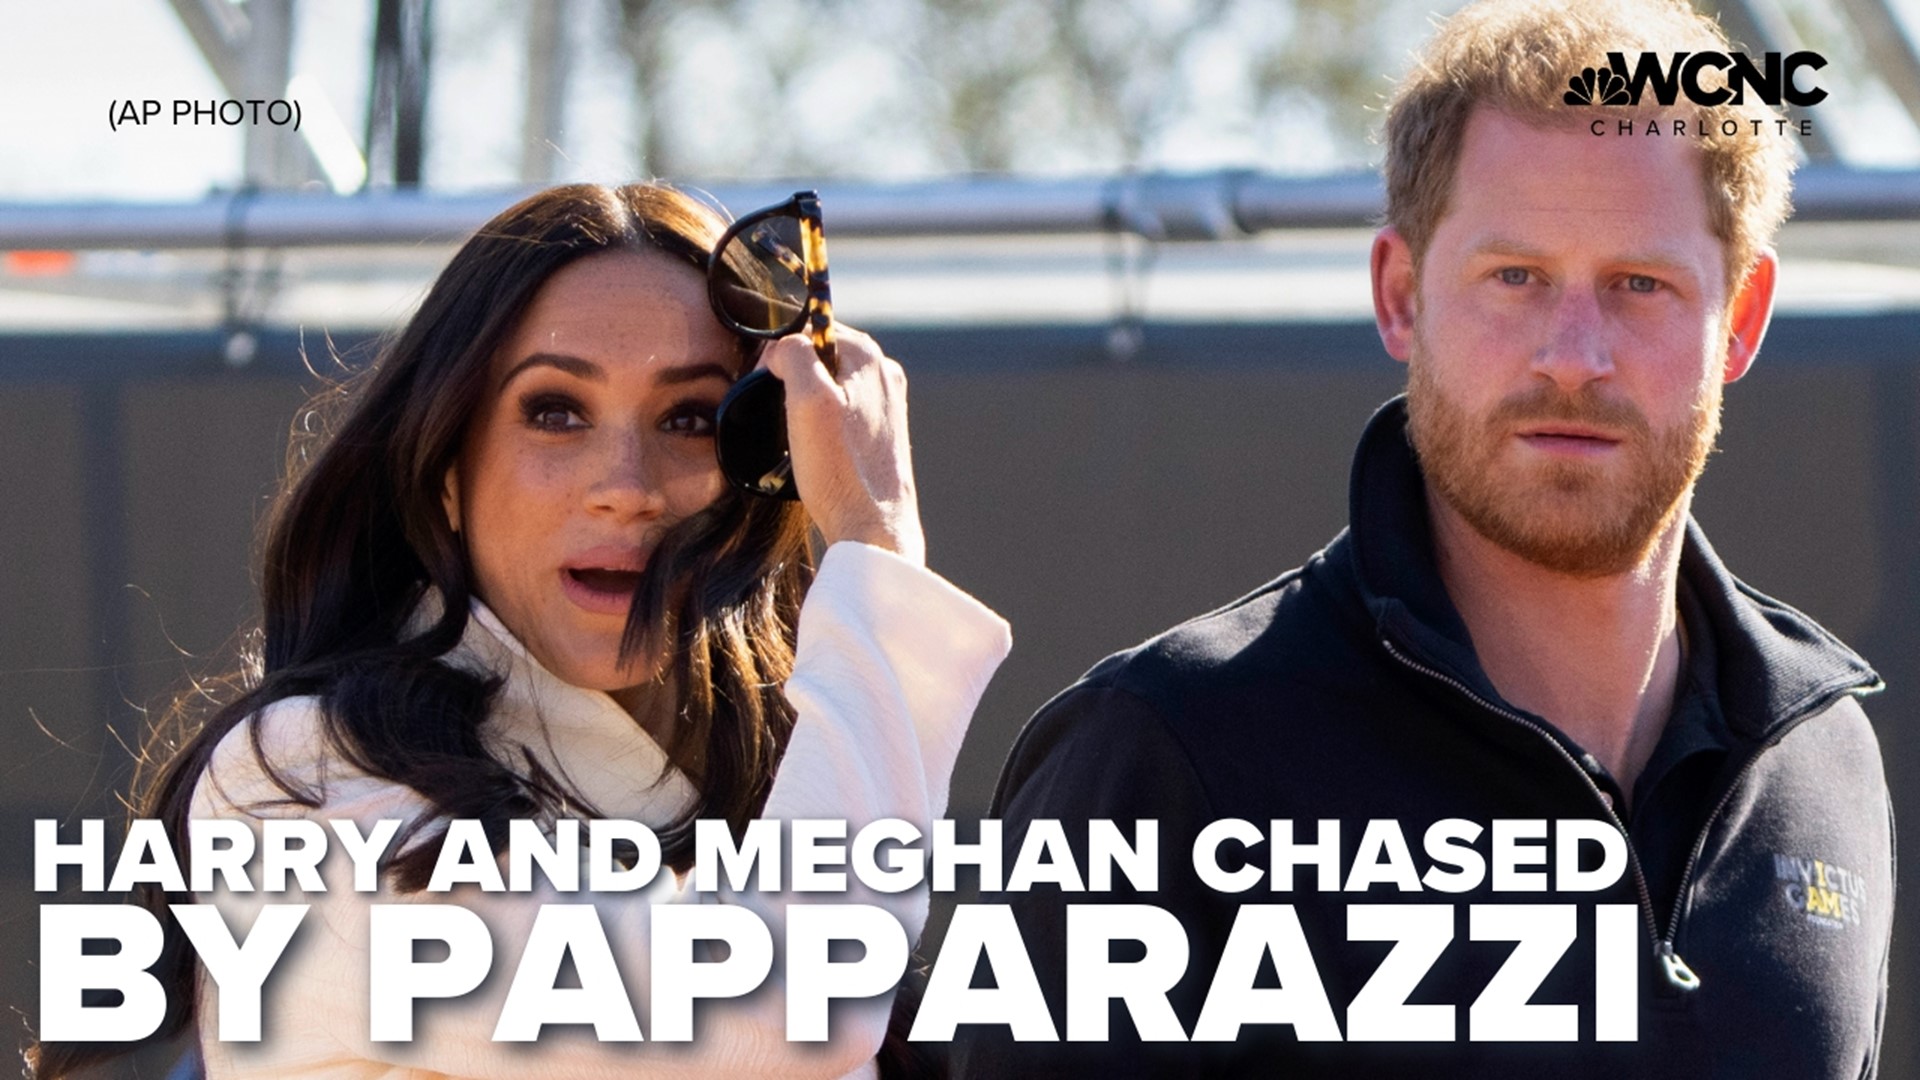 Authorities say Prince Harry and Meghan were hiding inside a police station after being chased.